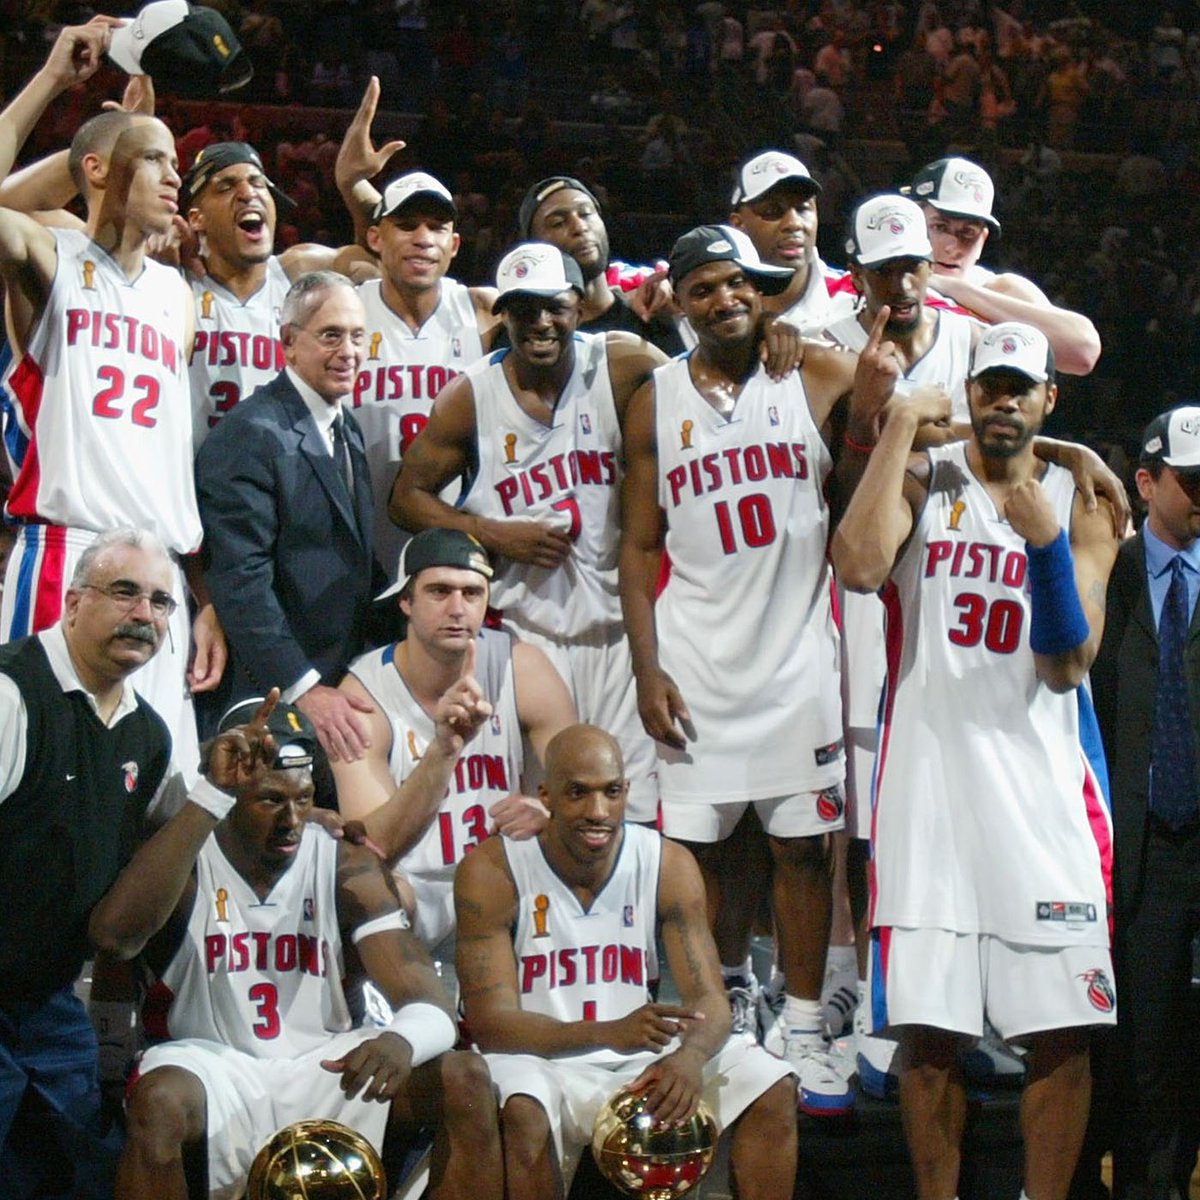 #2004Pistons proved that a strong team-oriented strategy can outplay superstar talent. This thread delves into why a balanced, defense-first approach in #basketball can sometimes be superior to individual brilliance. 🏀 #NBA